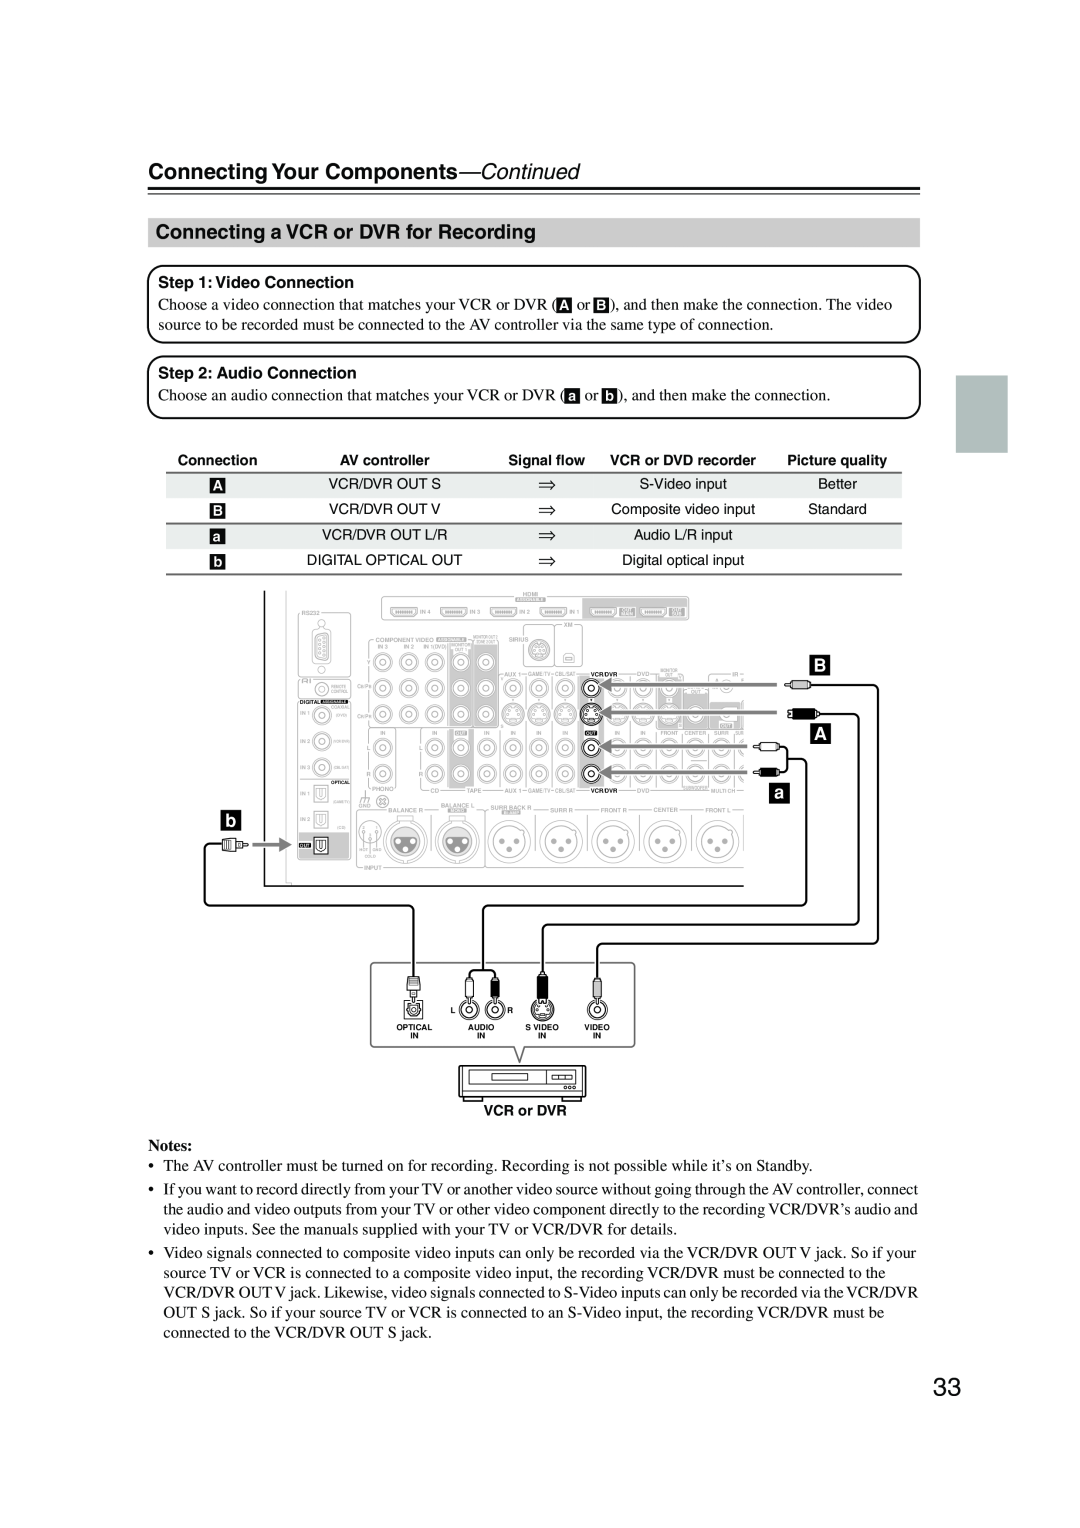 Onkyo PR-SC885 instruction manual Connecting a VCR or DVR for Recording, Connecting Your Components—Continued, Notes 